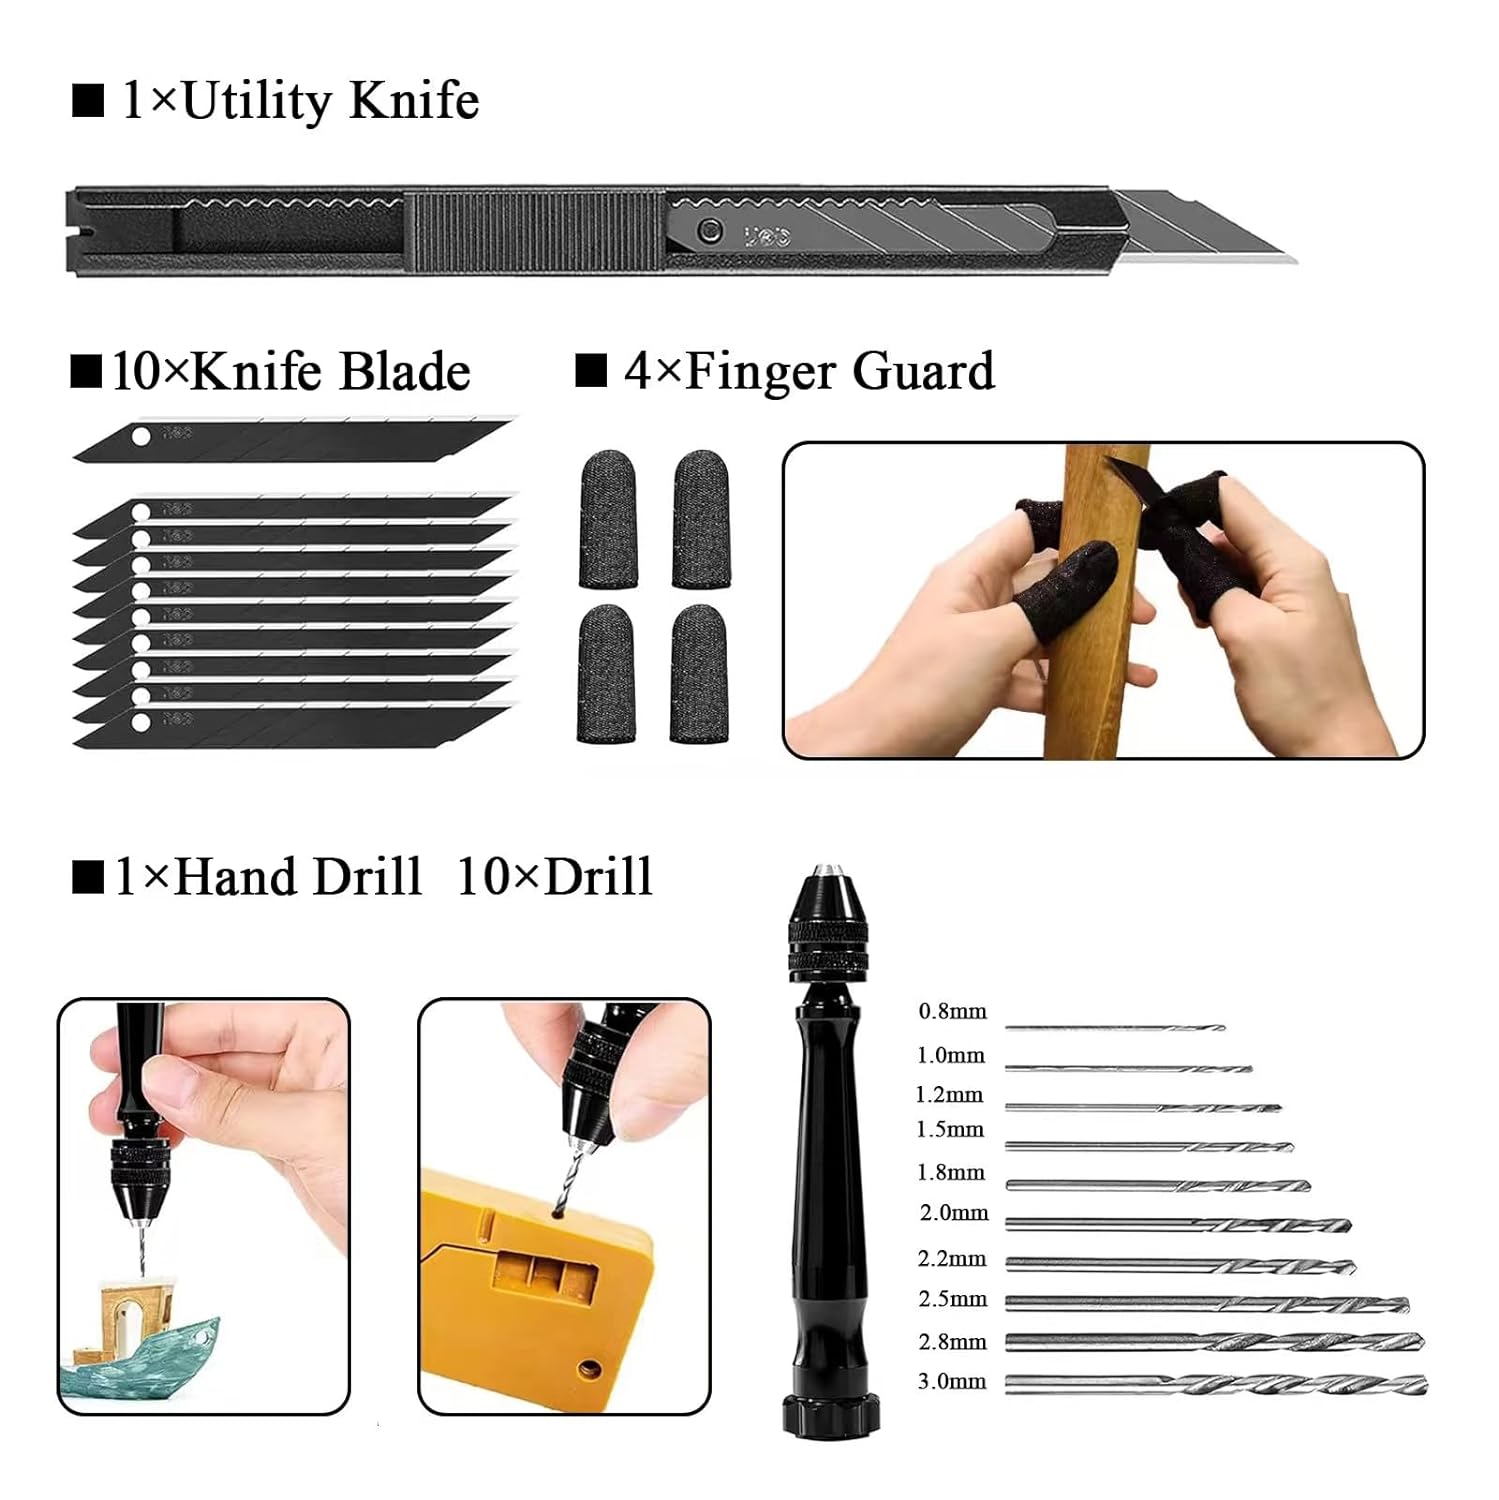 62pcs-3d-printer-tool-kit-3d-printing-accessories-includes-nozzle-cleaning-kit-deburring-tools-removal-tools-needle-file-2 62Pcs 3D Printer Tool Kit Review